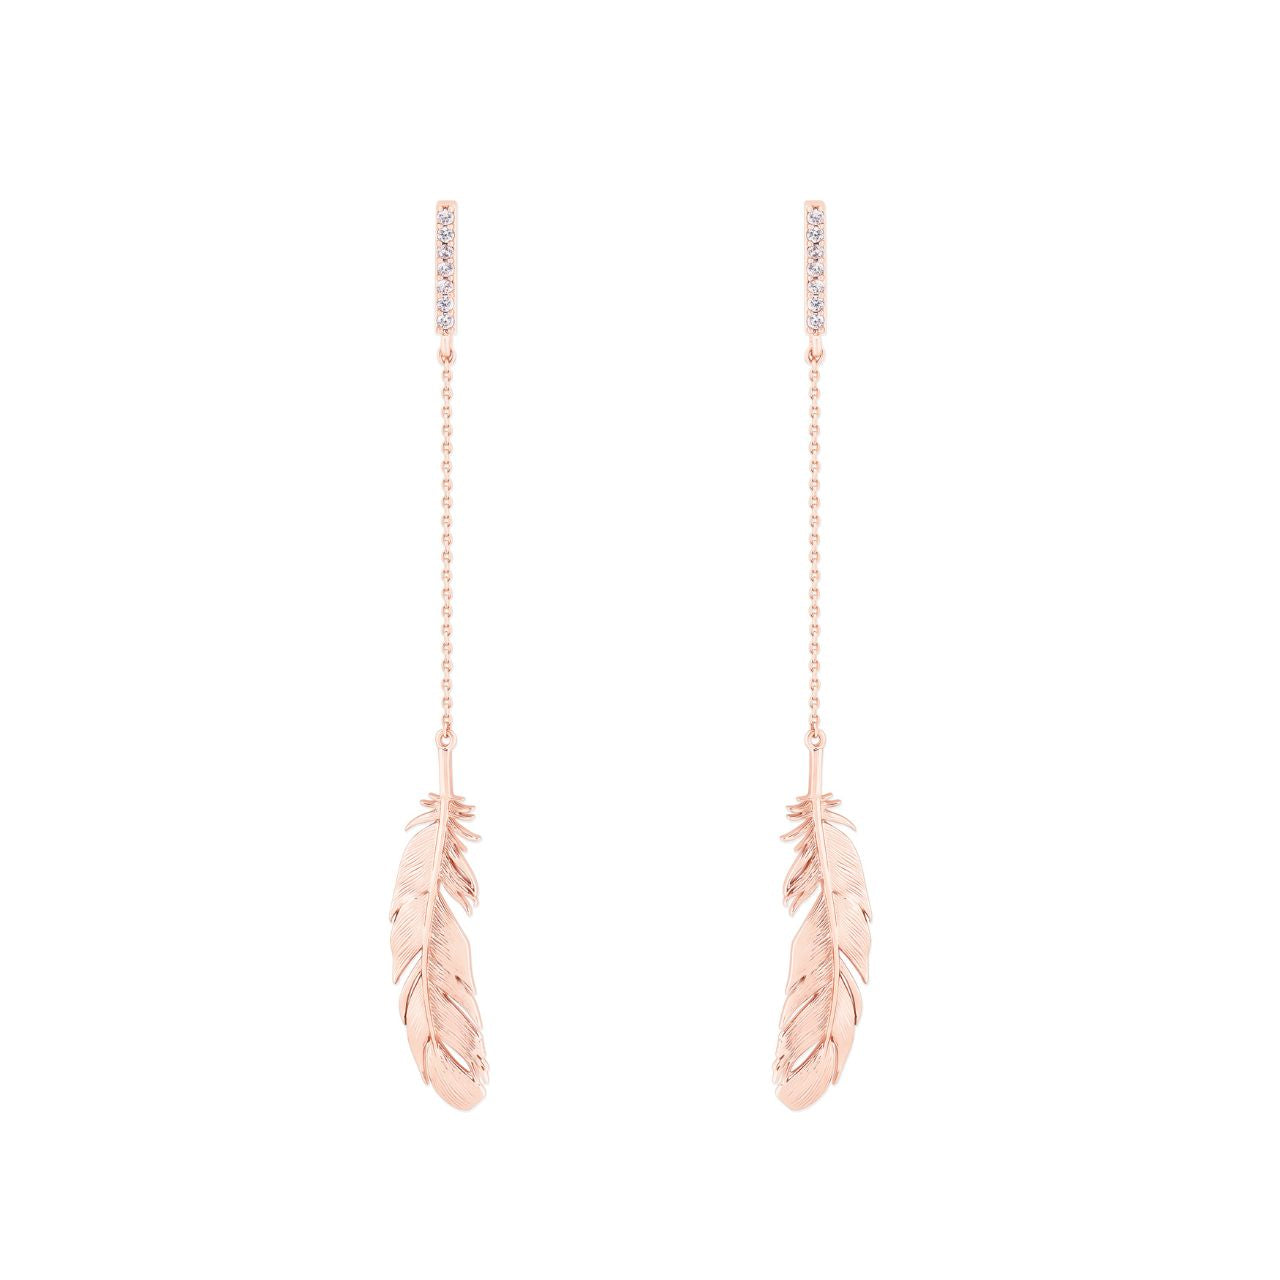 Rose Gold Feather & Chain Long Earrings by Tipperary  These Rose Gold Feather & Chain Long Earrings by Tipperary will instantly upgrade your look. Crafted with rose gold plated brass, this timeless jewellery piece is lightweight and durable. Enjoy the beauty of a classic design that will last for many years to come.